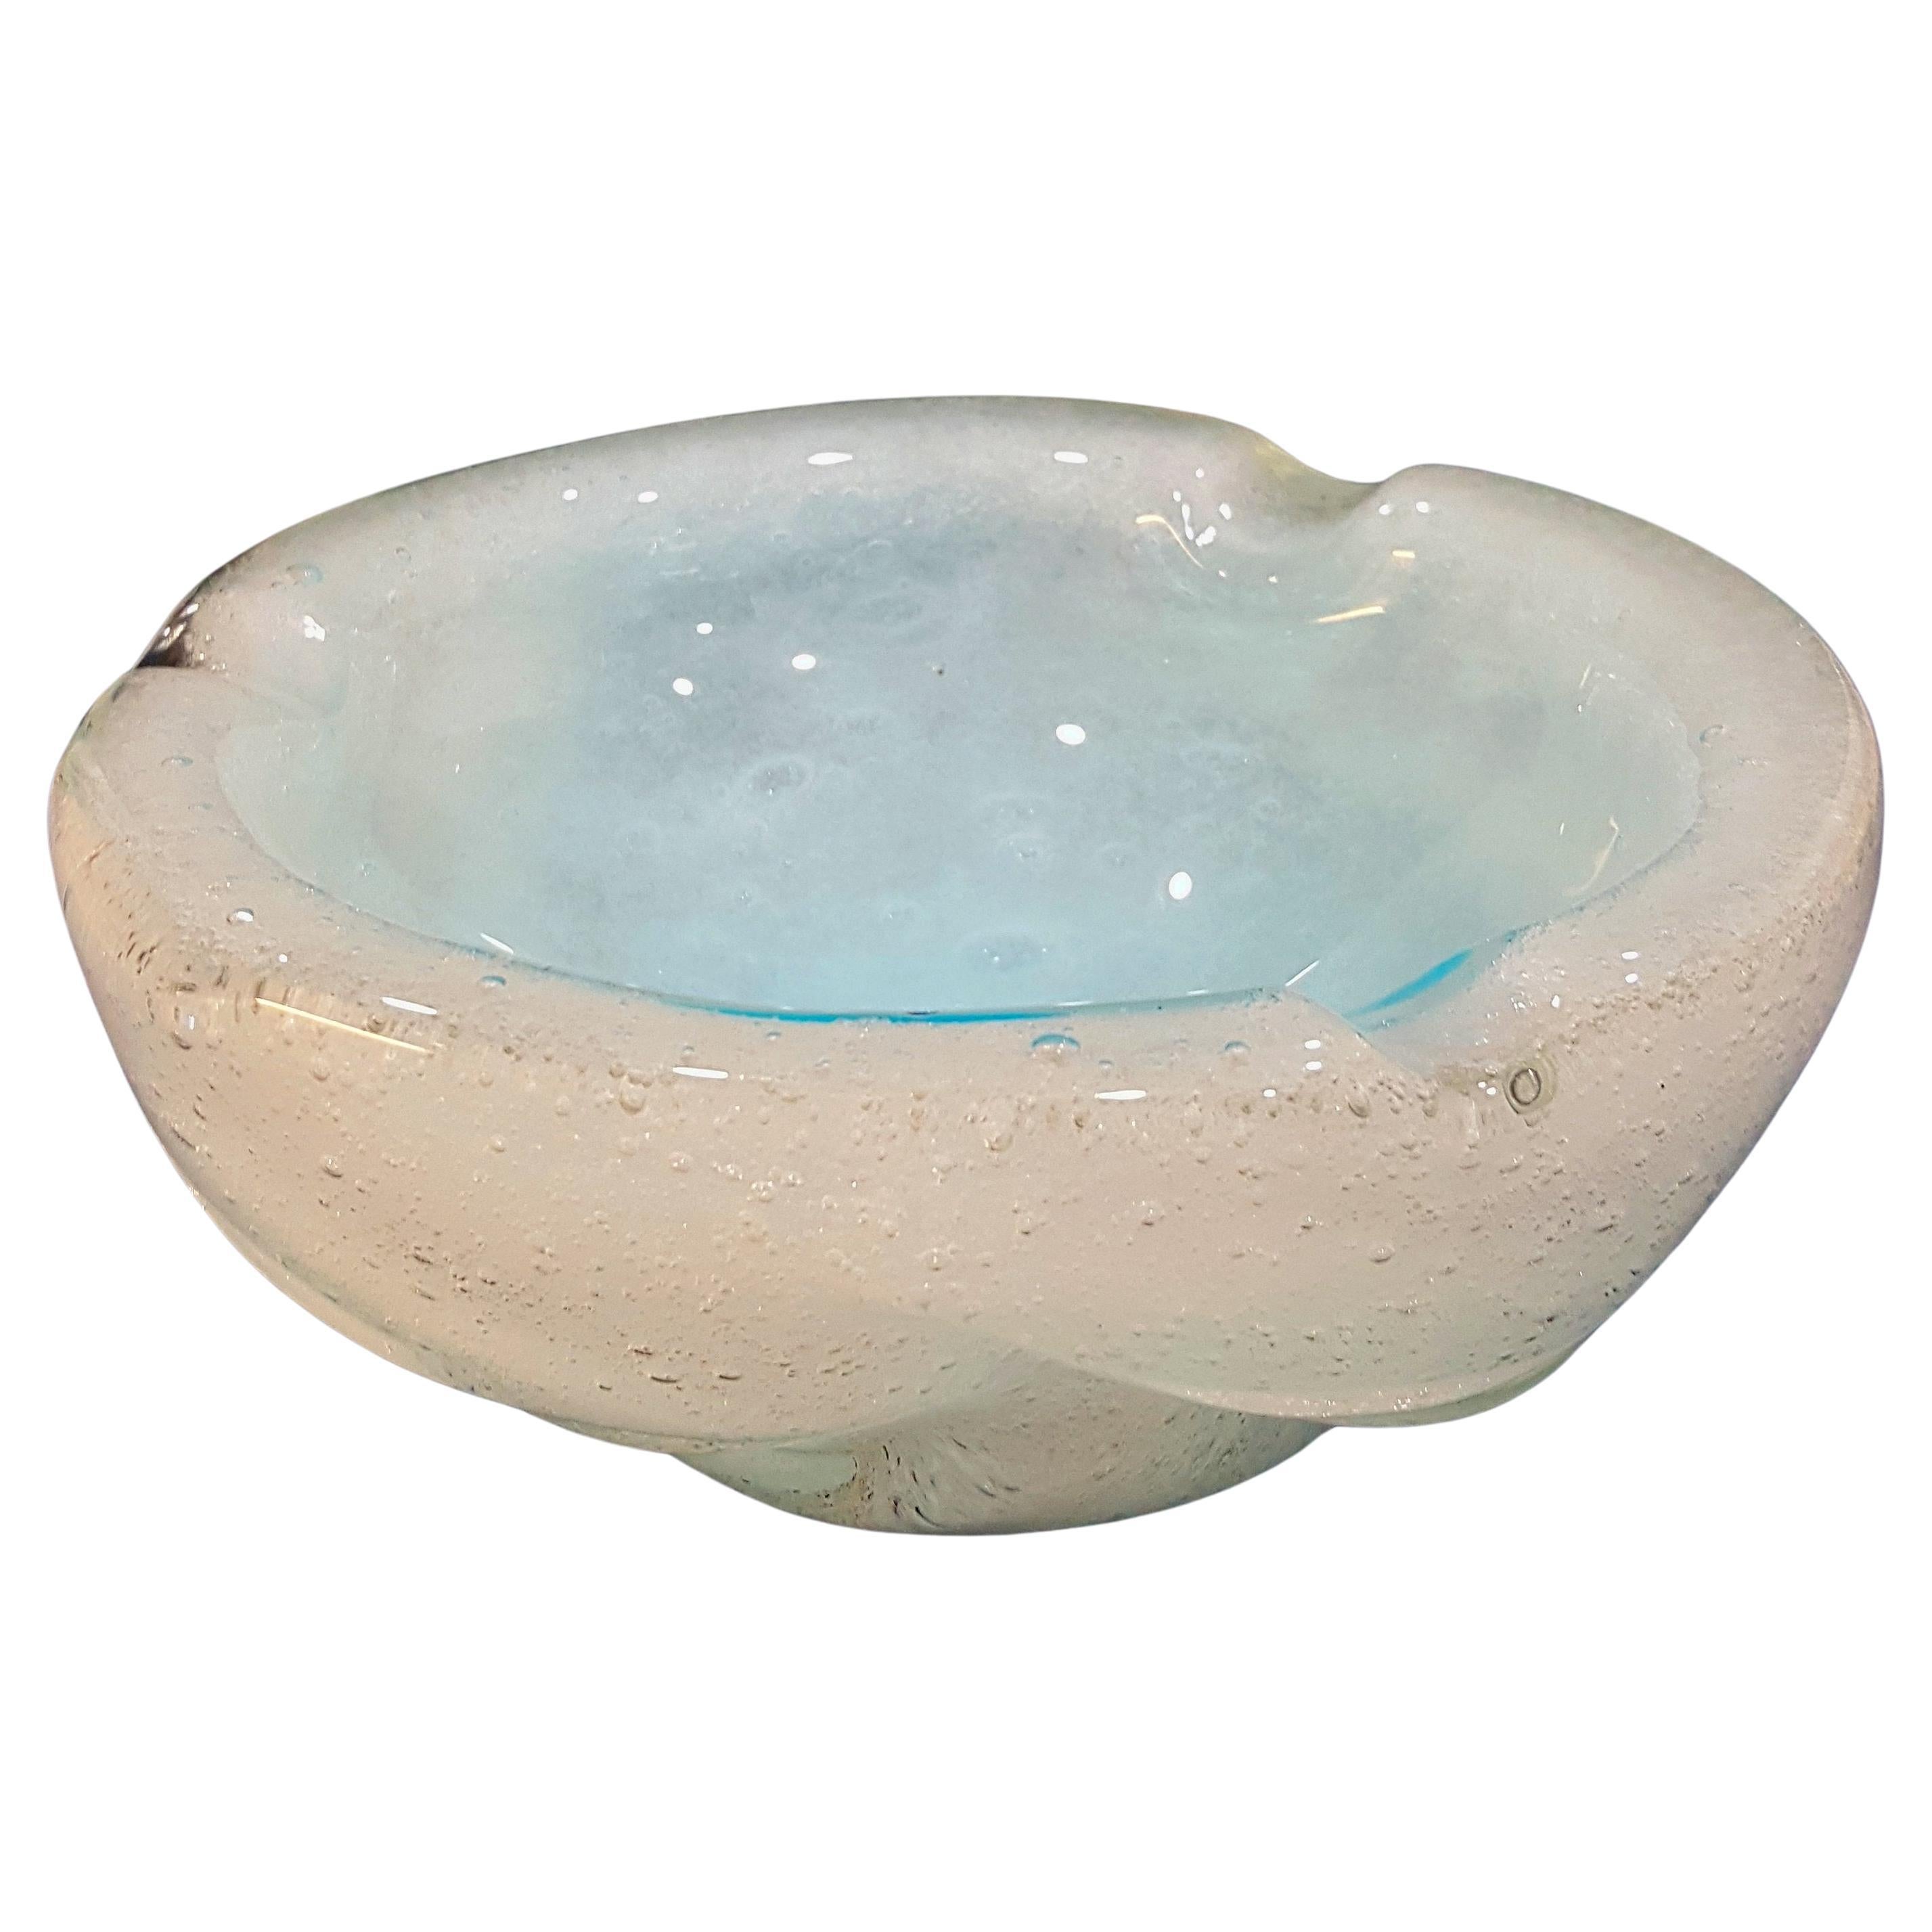 Murano Glass Bollicine Ashtray, Sky Blue in White, by Seguso
Sky blue encased in white, hand blown with generous bollicine (often confused for pulegoso) bubbles. 
The base is polished smooth and shows the indention where the pontil was removed.